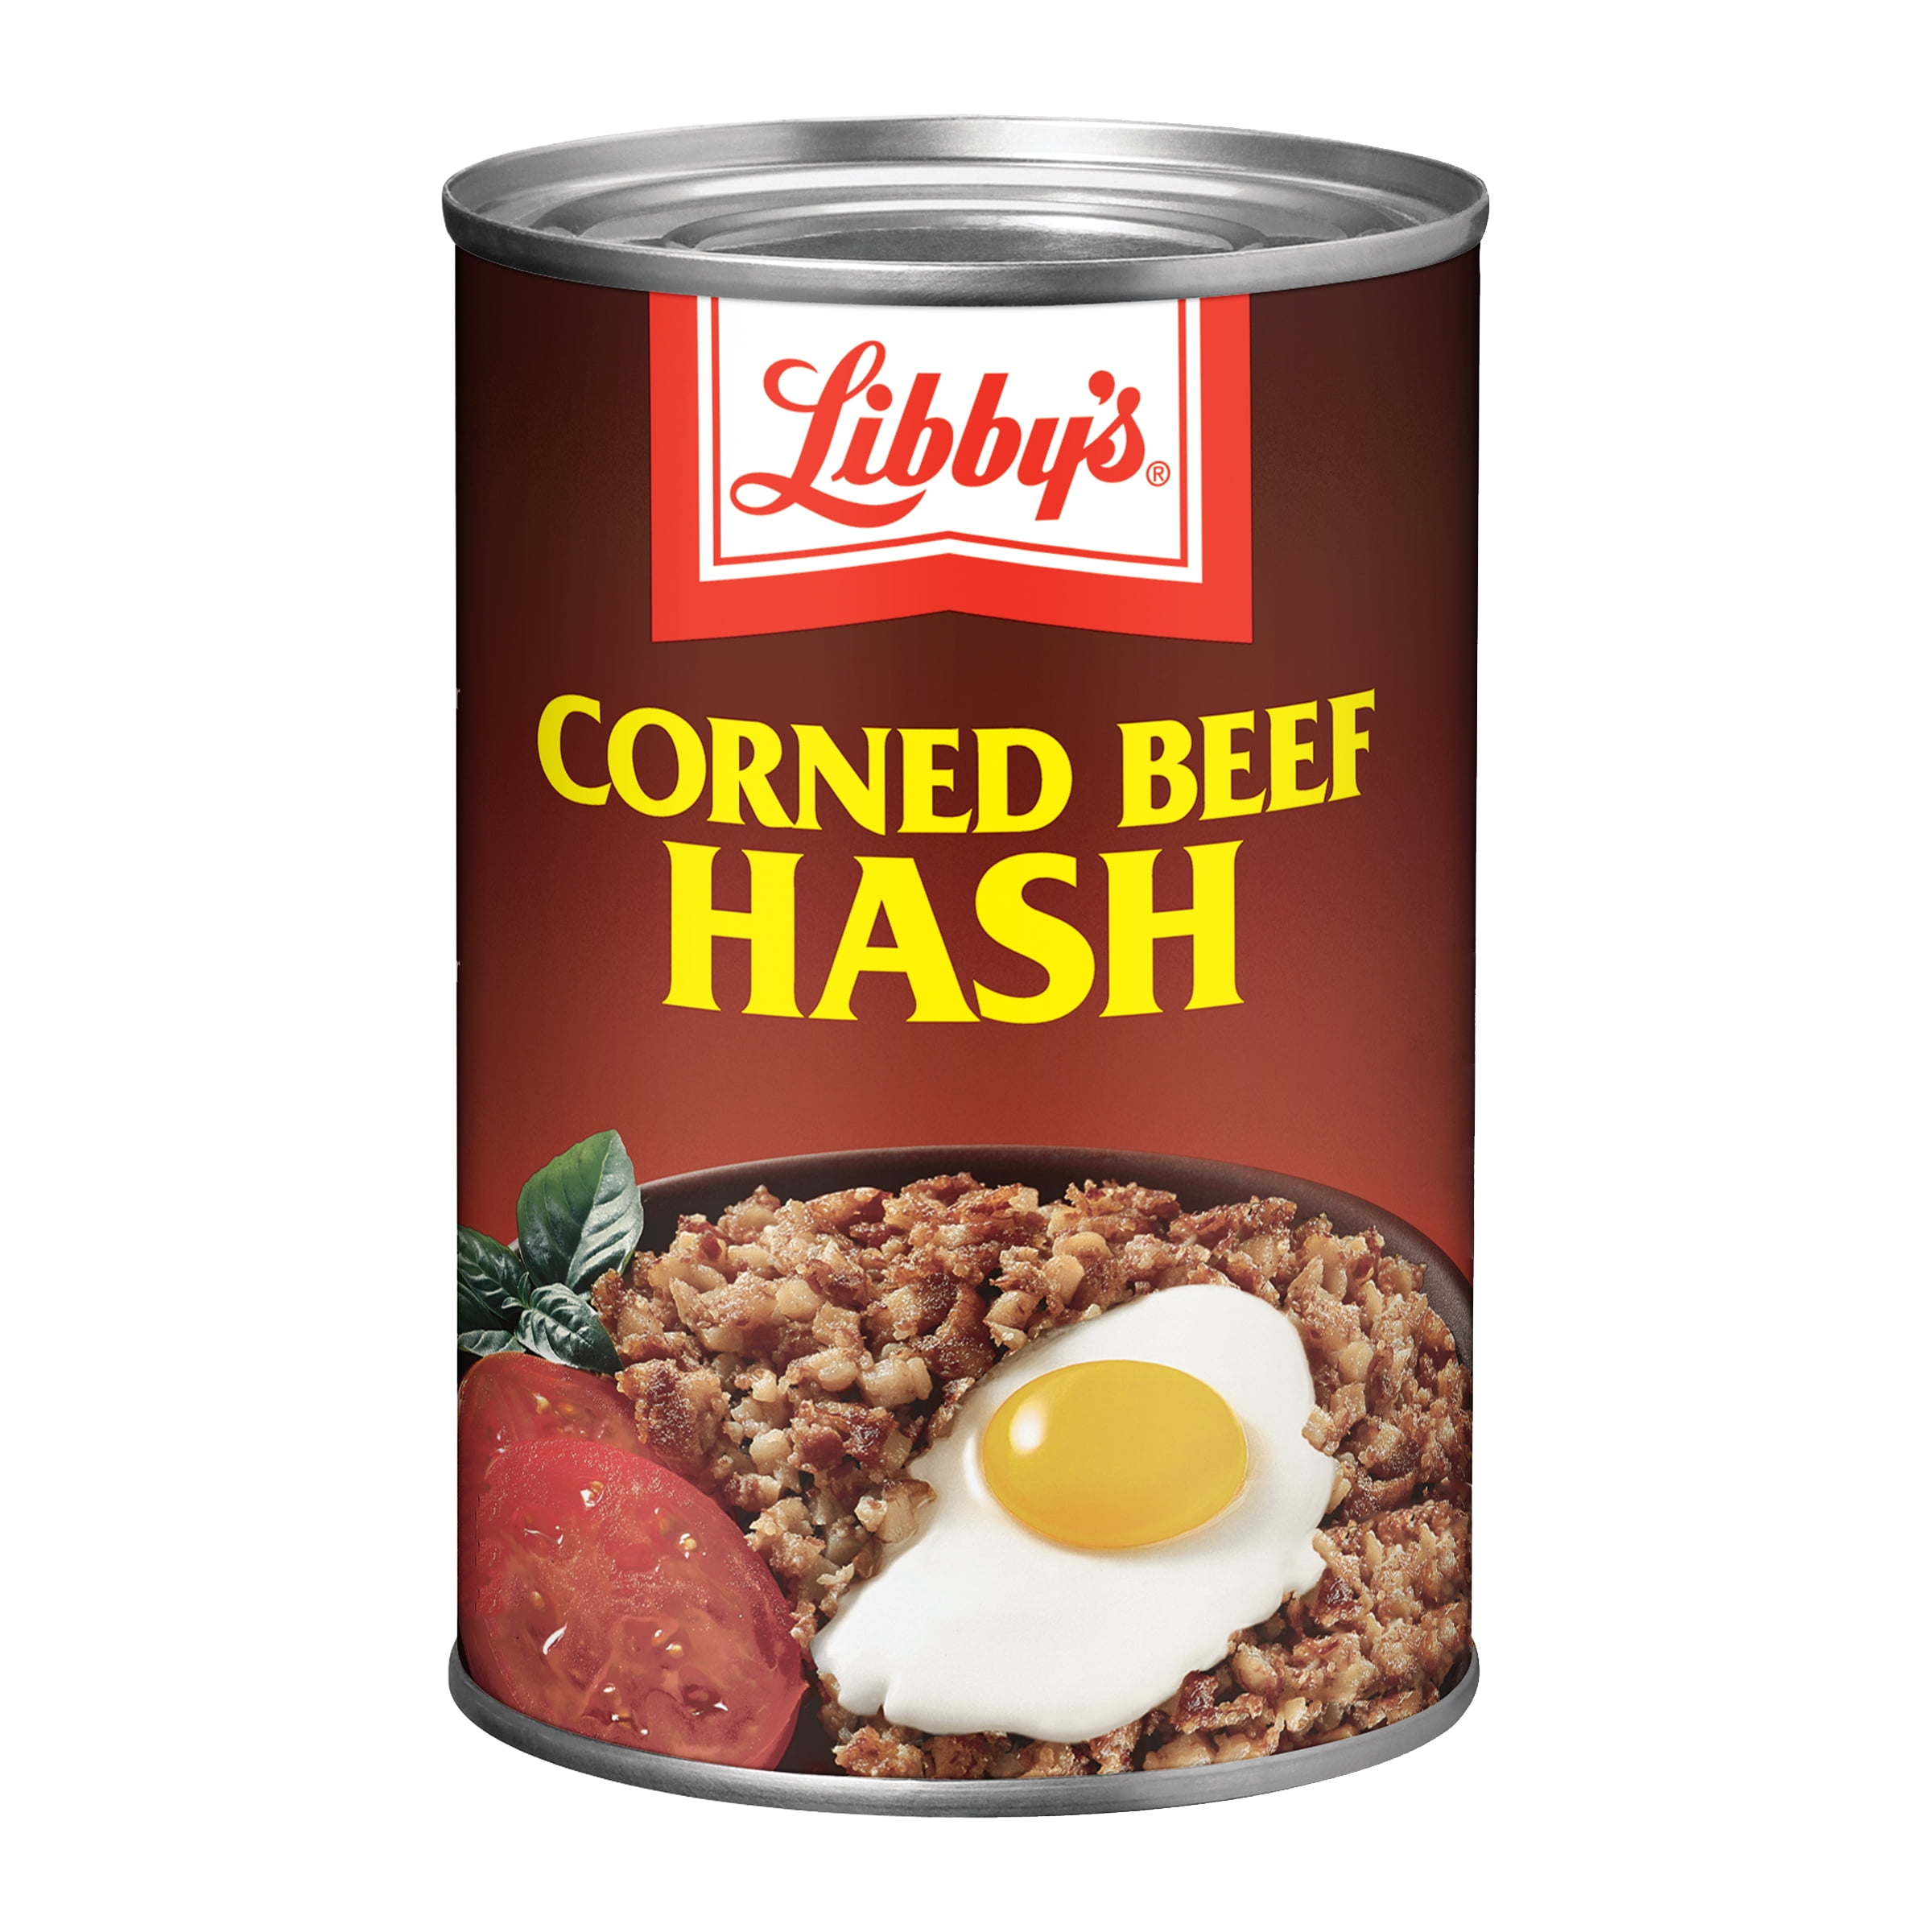 Libby's Corned Beef Hash, 15 oz Can